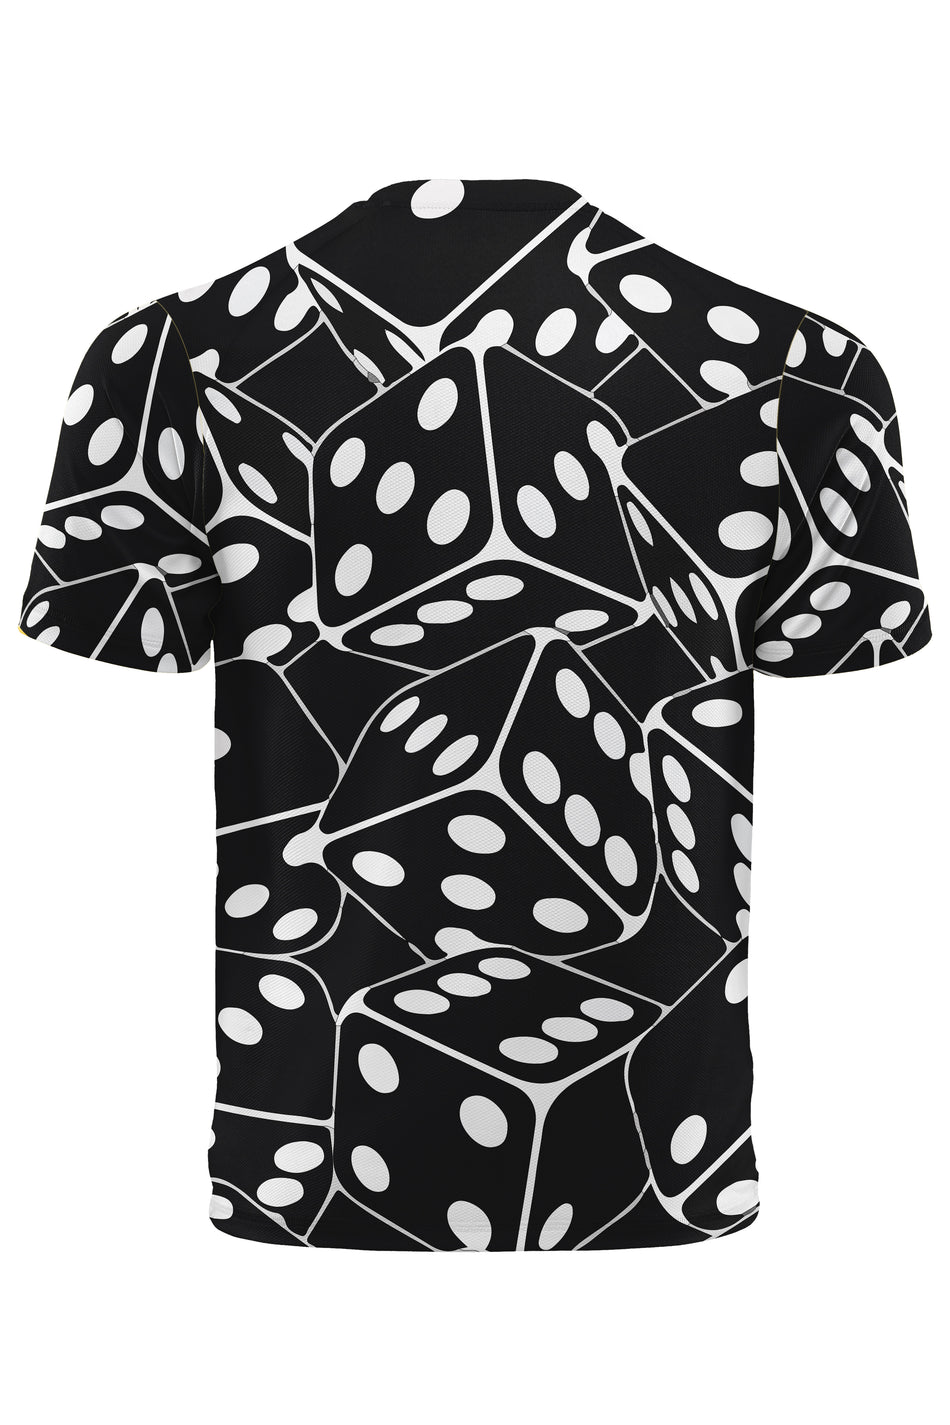 AOUT - DICE TSHIRT